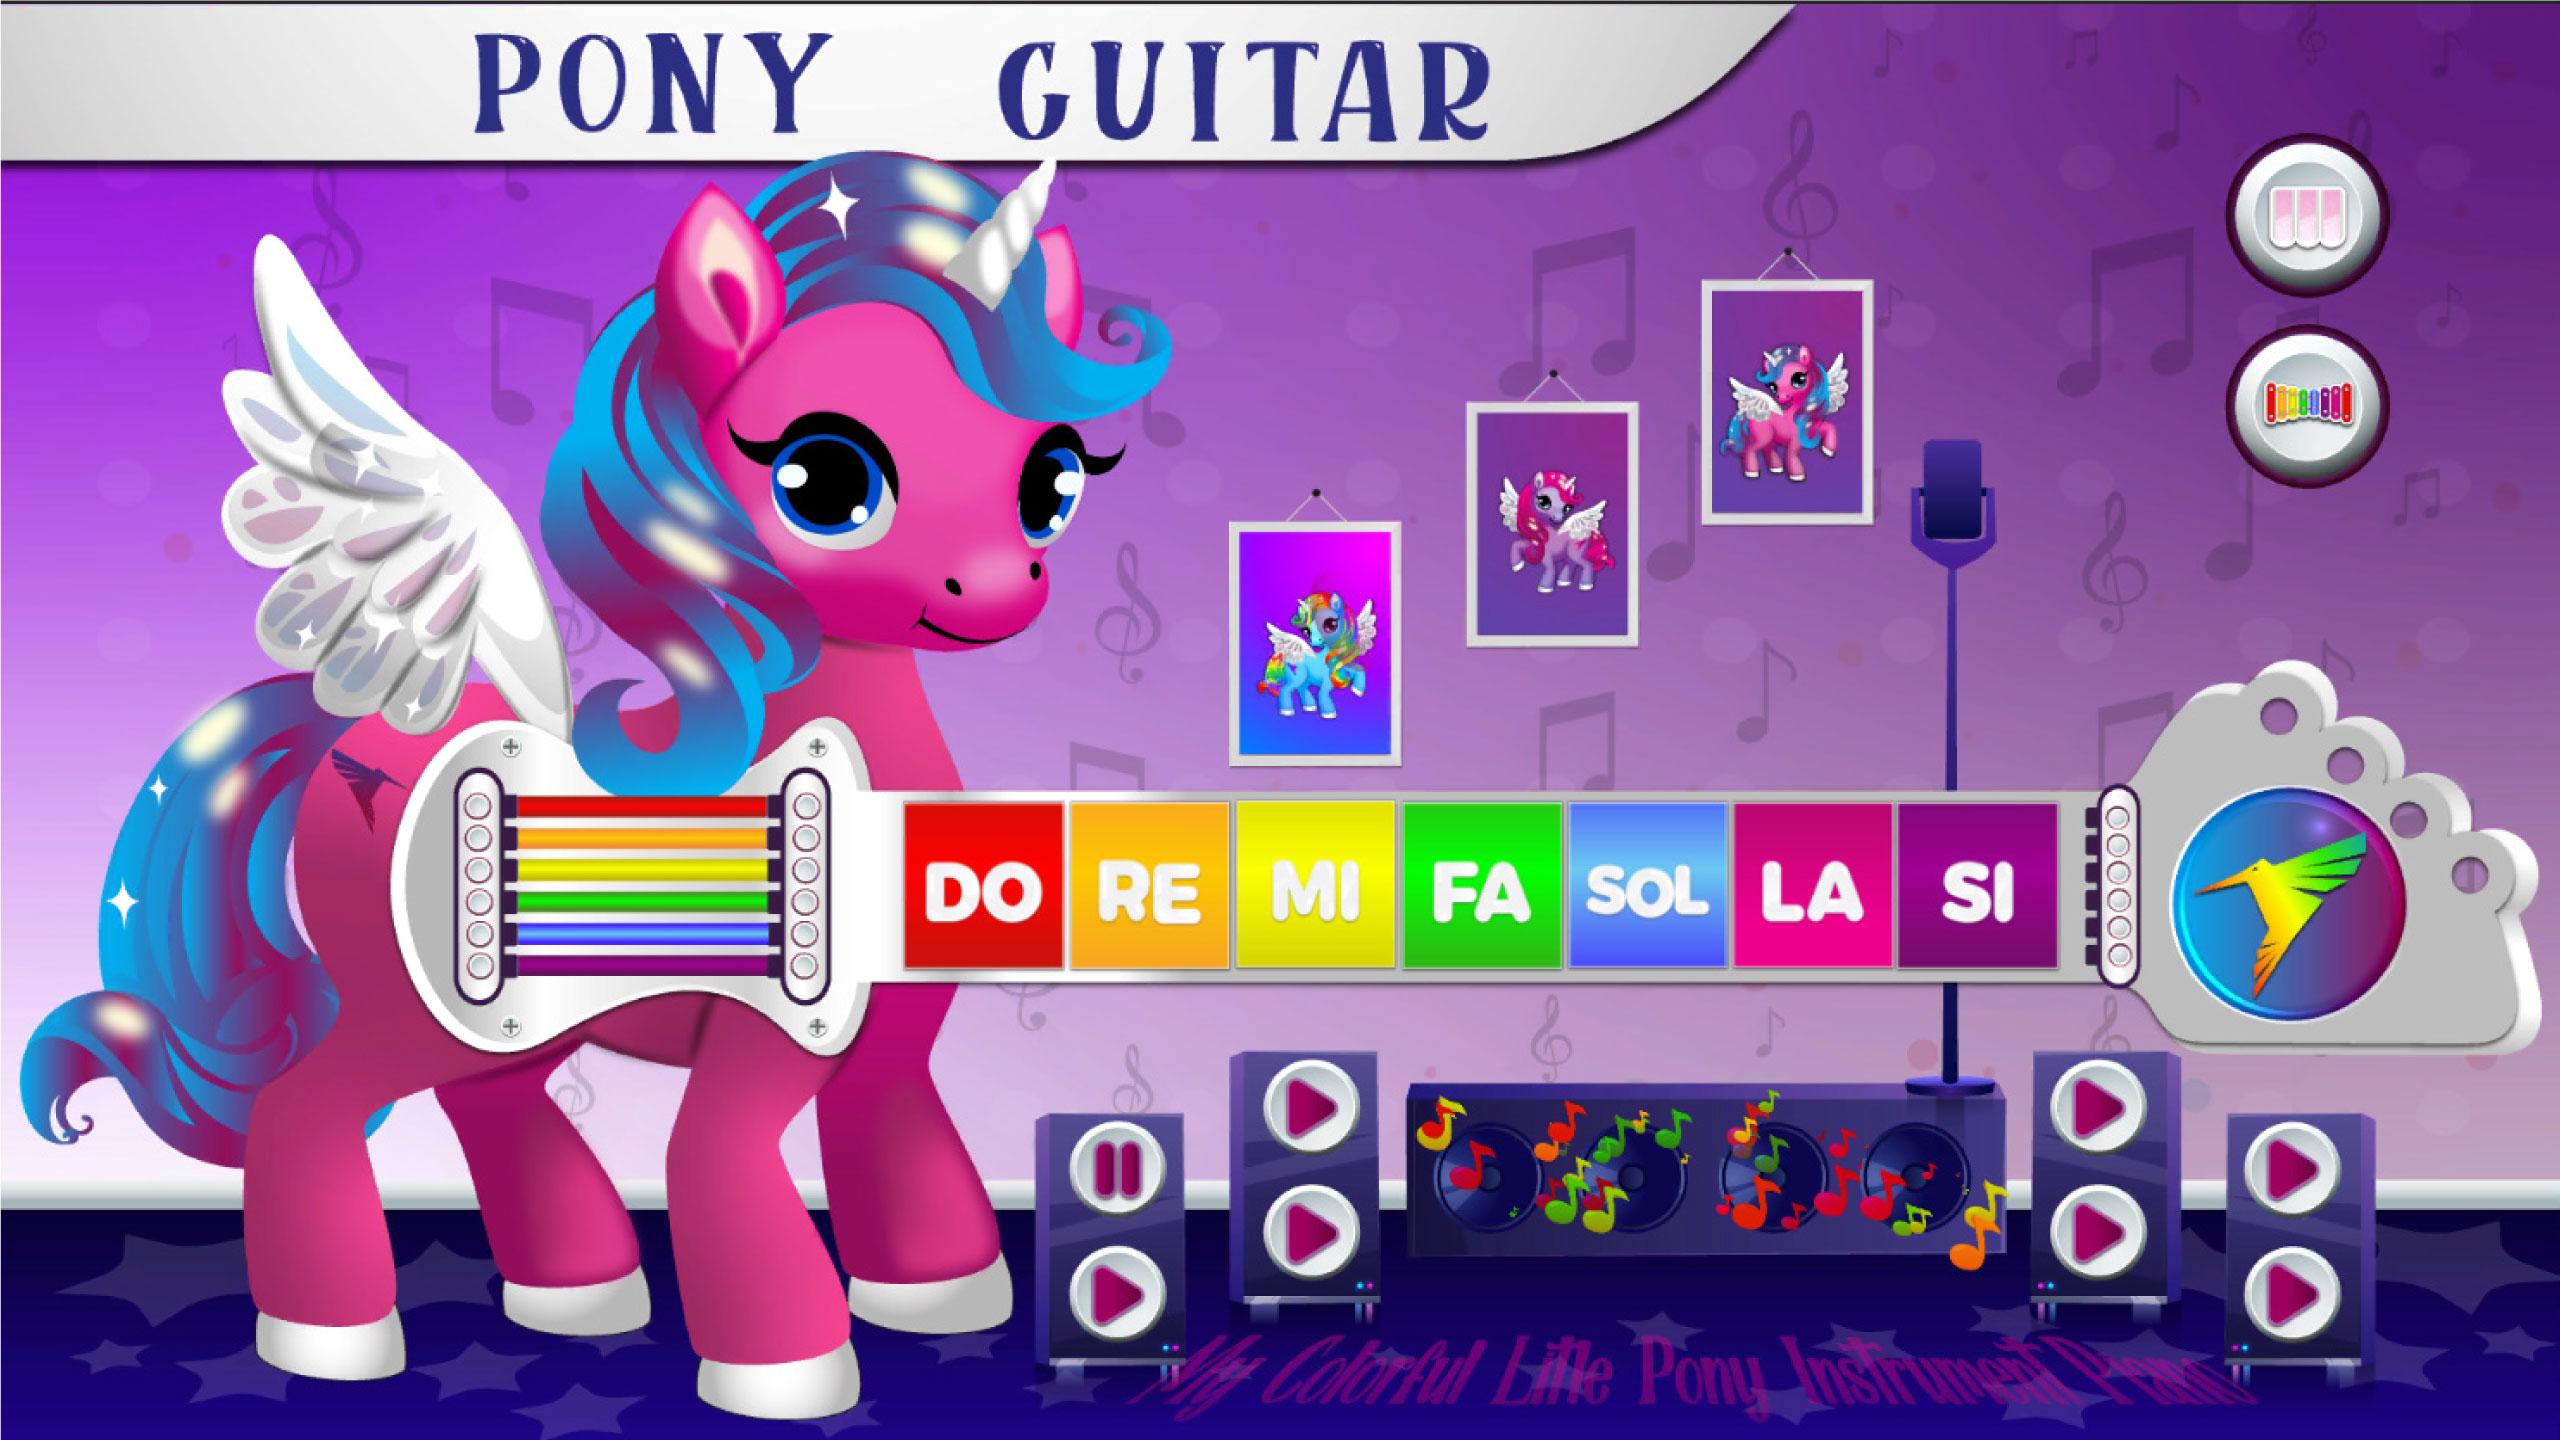 My Colorful Litle Pony Instrument - Piano 2.0 Screenshot 14